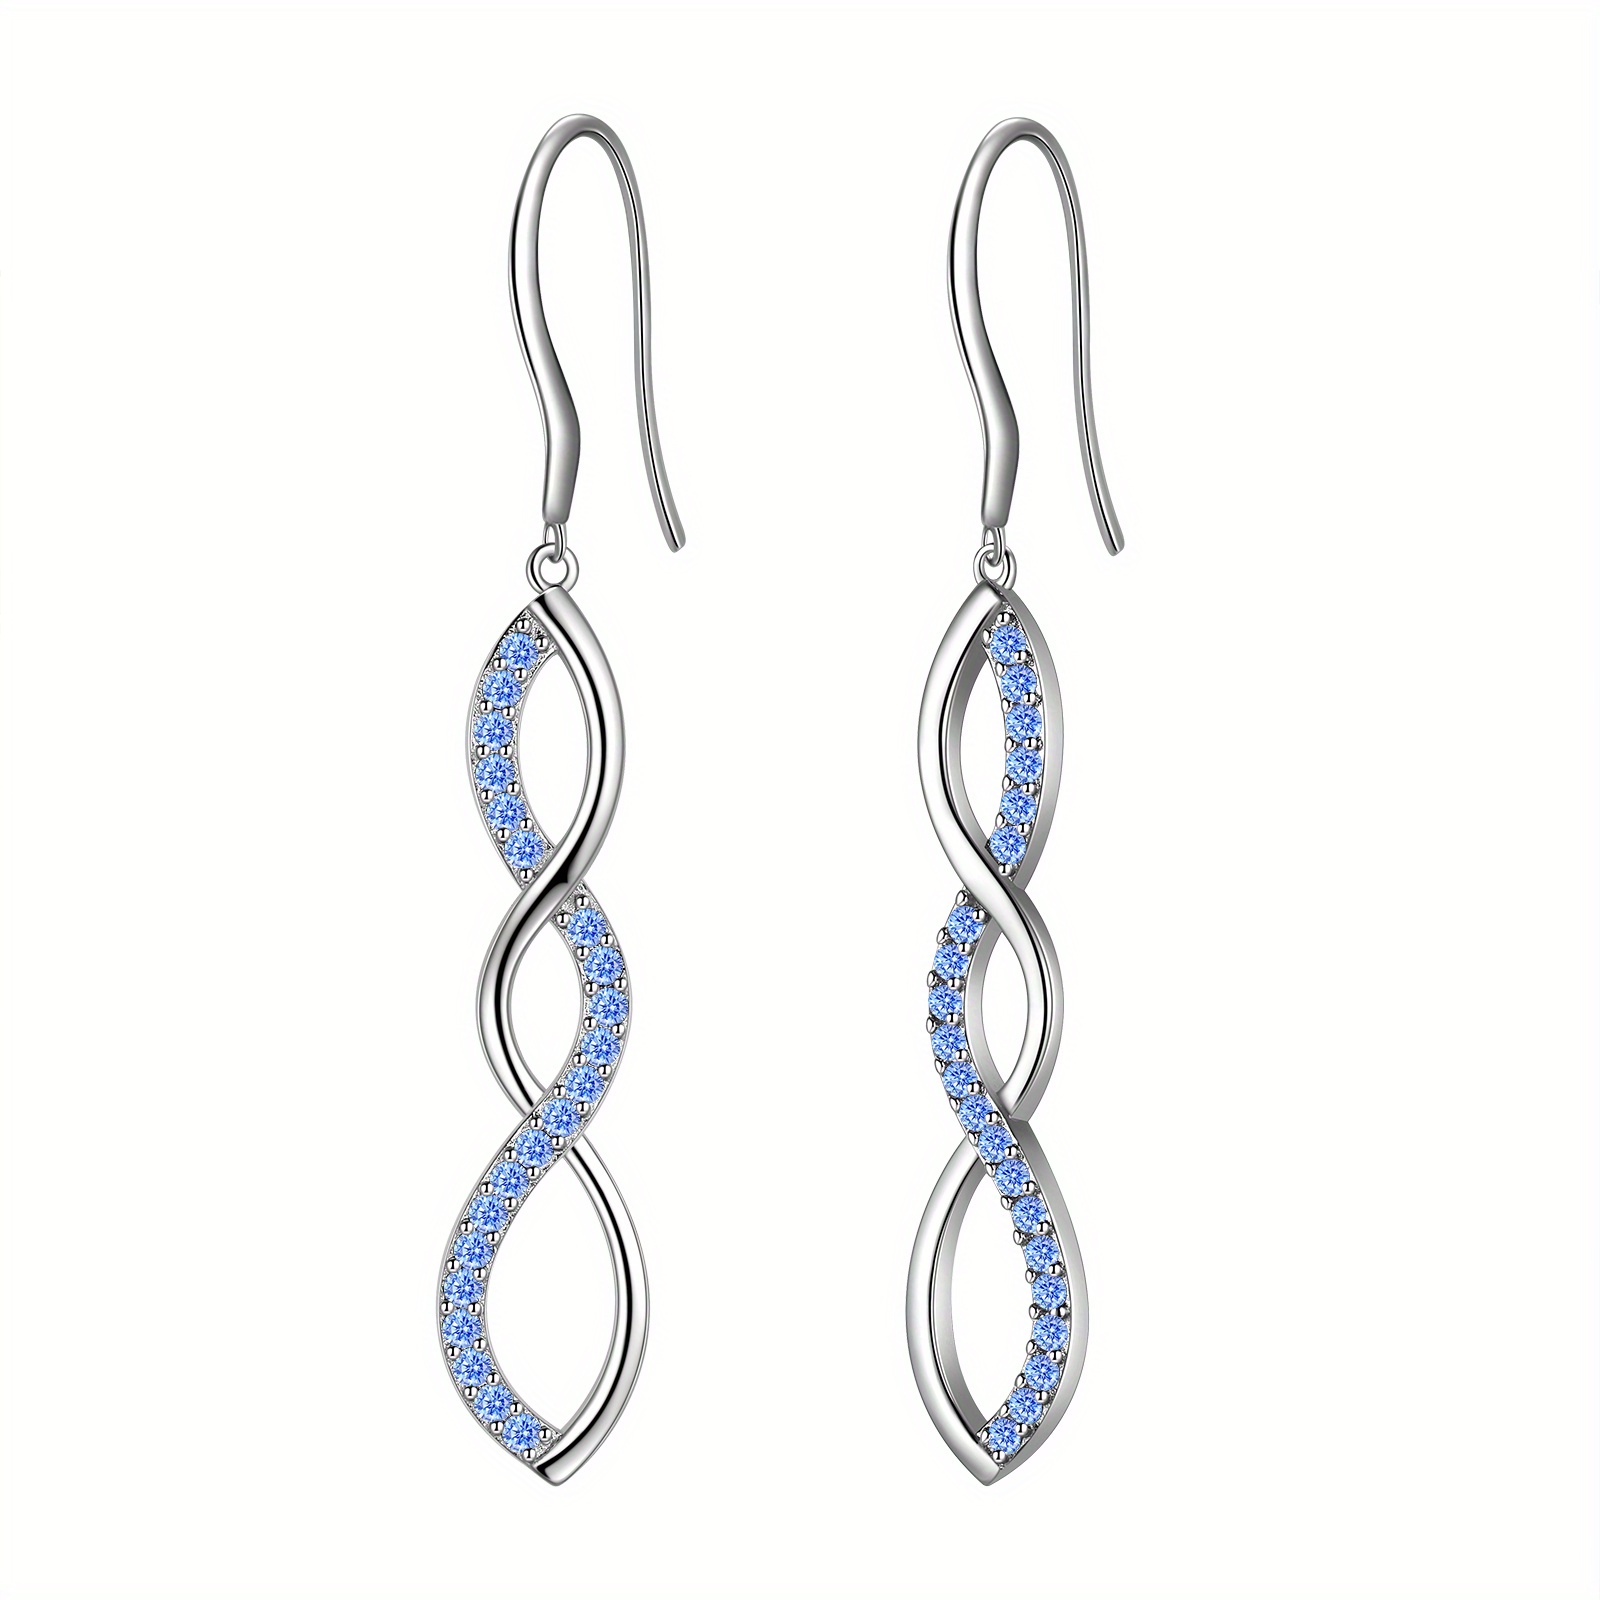 Silver Spirals Crystal Clear Earrings - Trace Ellements